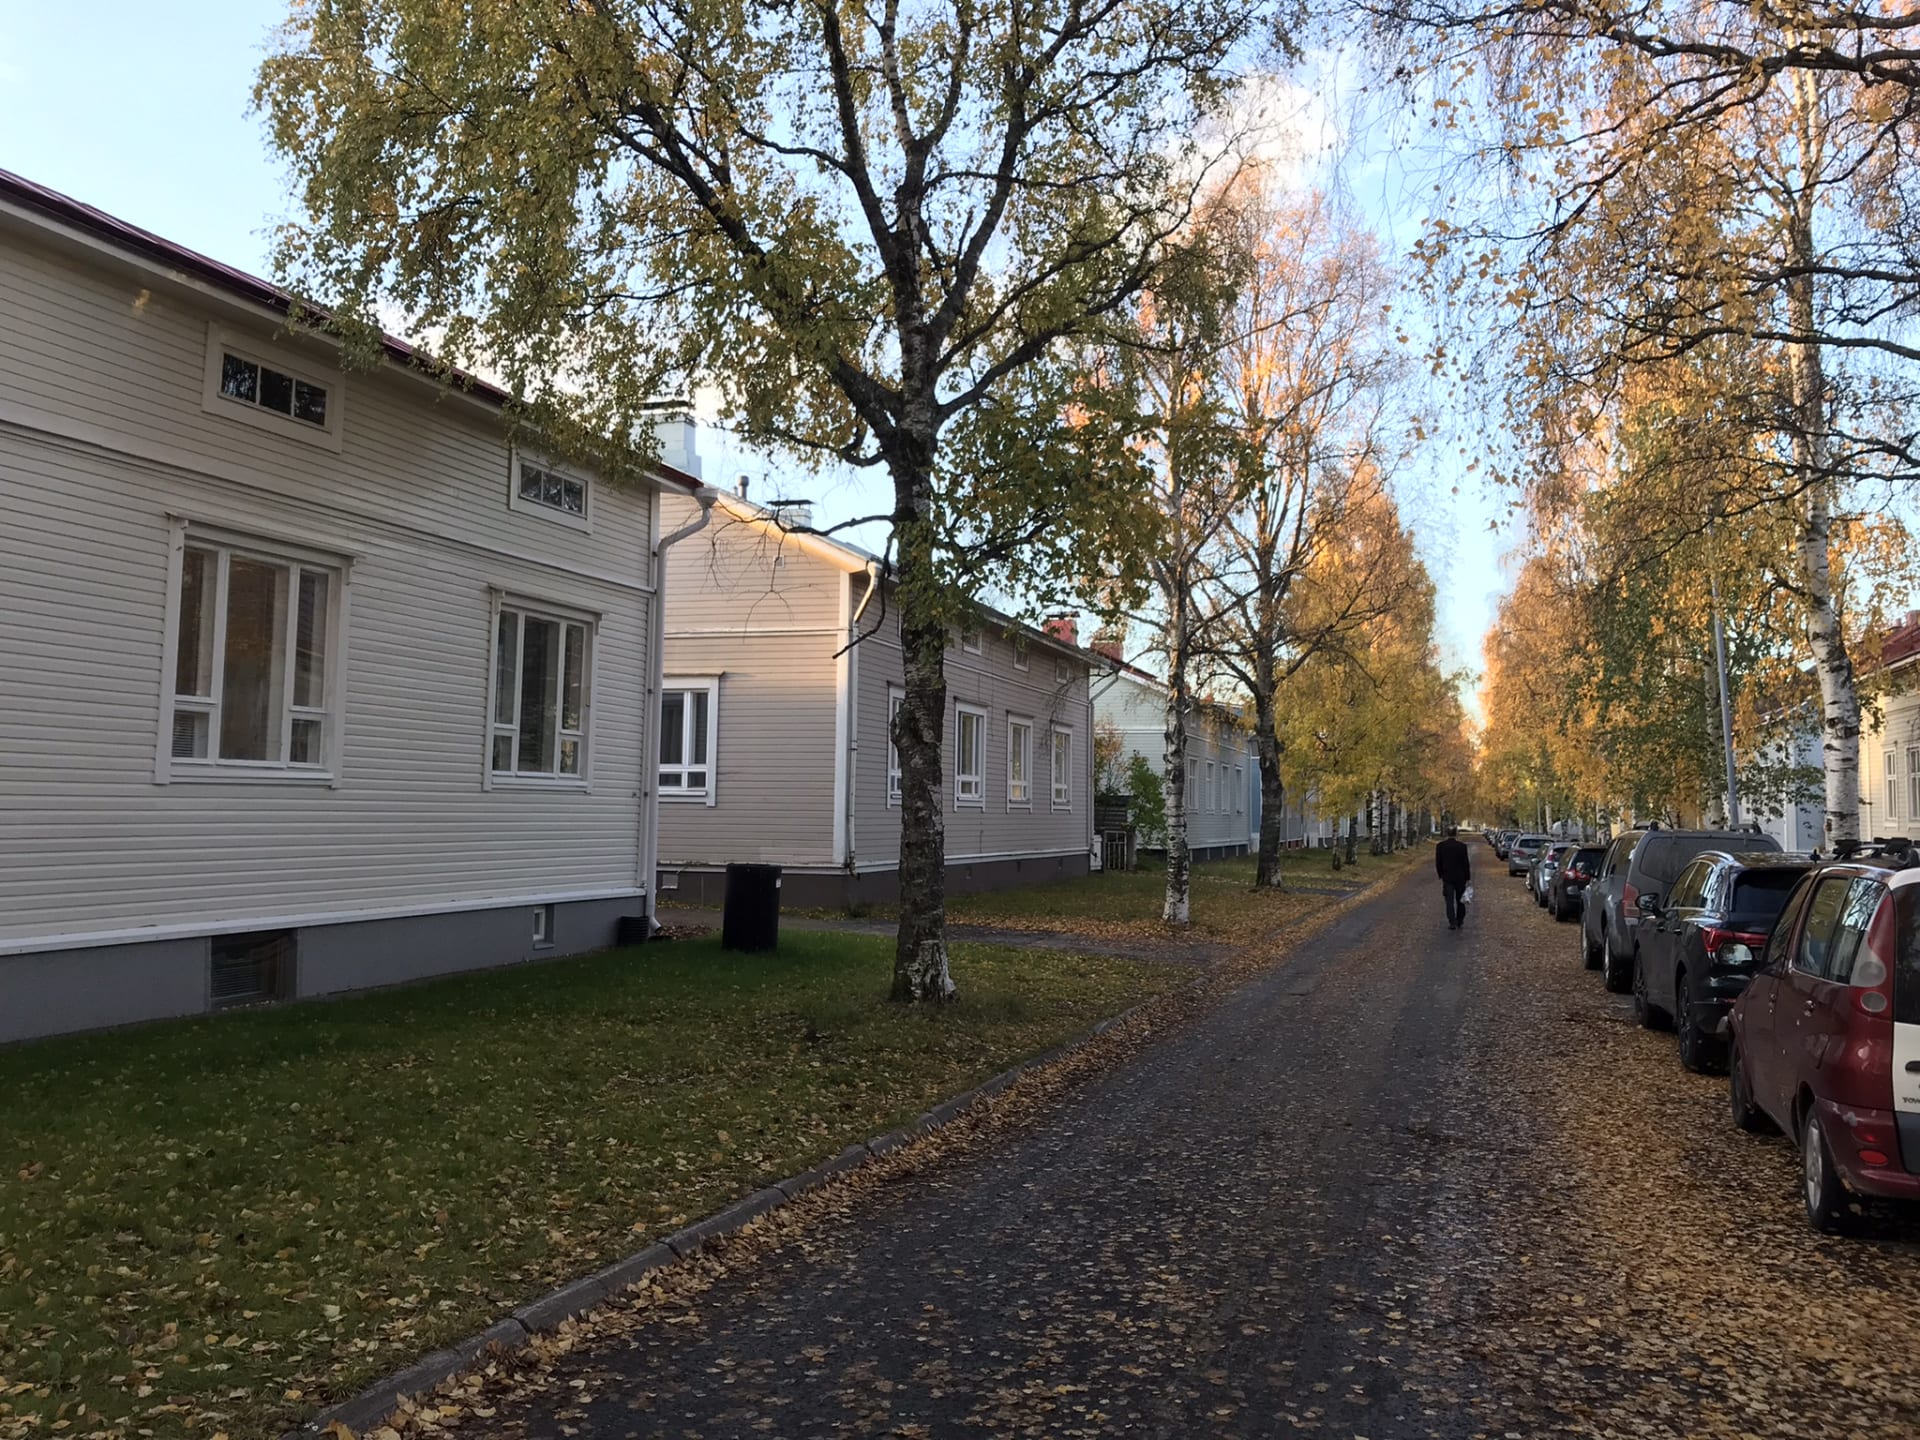 Row of pastel colored houses in Raksila with autumn foliage.